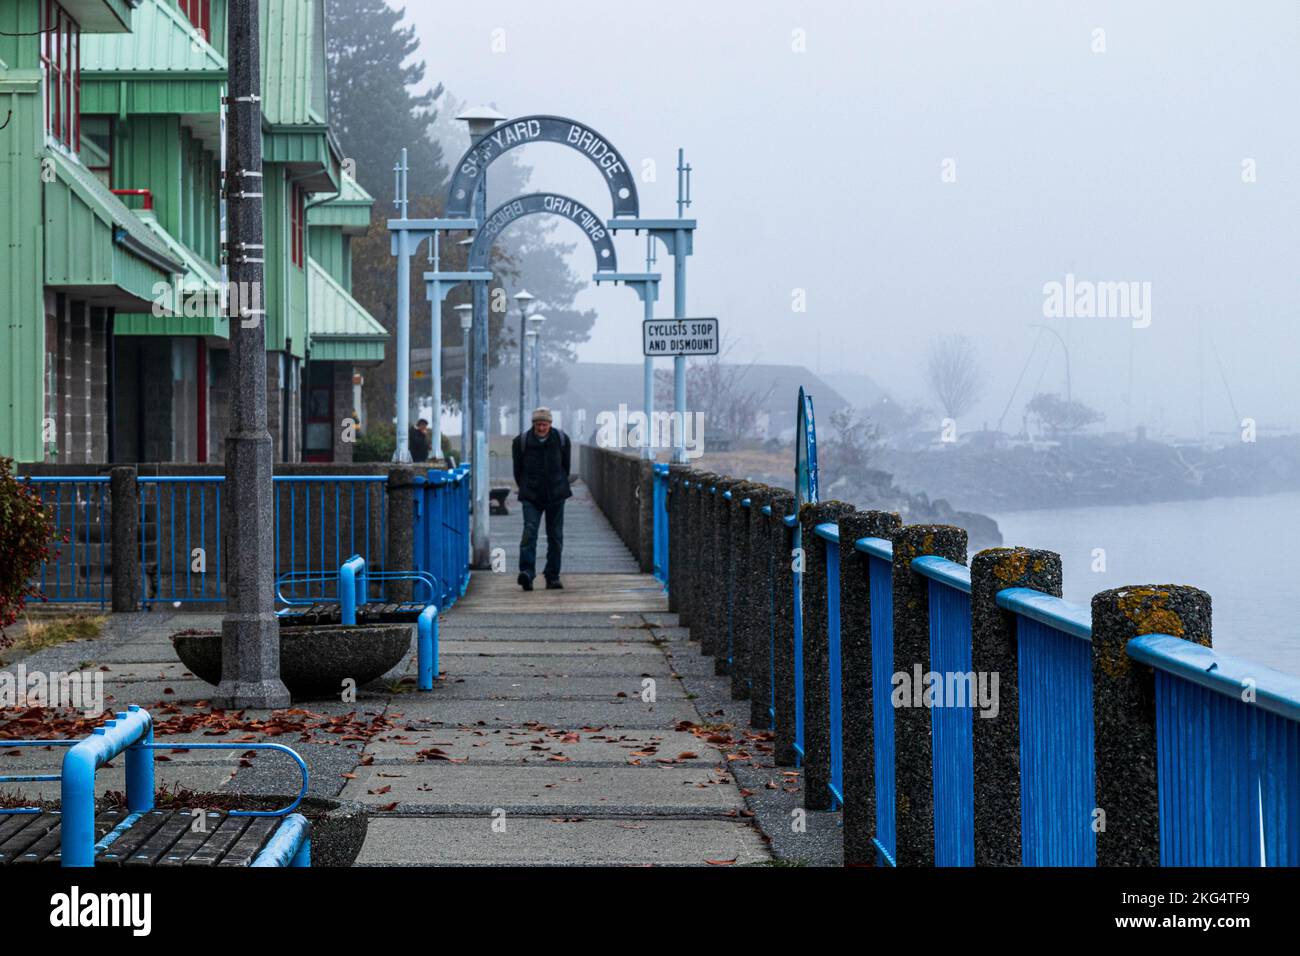 Waterfront walkway in fog, with old man walking on the wooden walkway.  Peaceful, quiet scene. Stock Photo